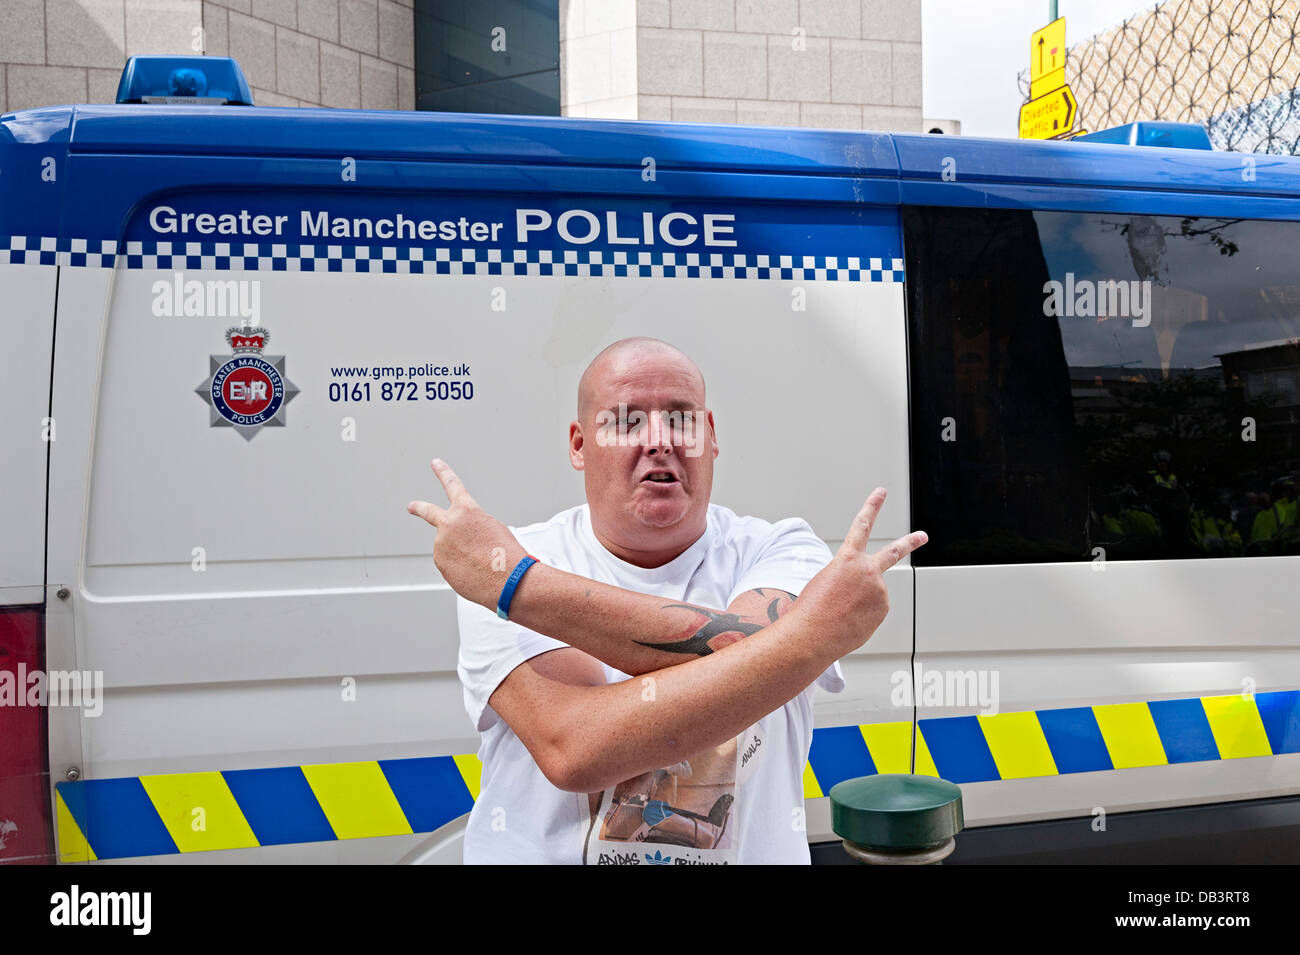 edl protest birmingham july 20th 2013 protester in front of van Stock Photo